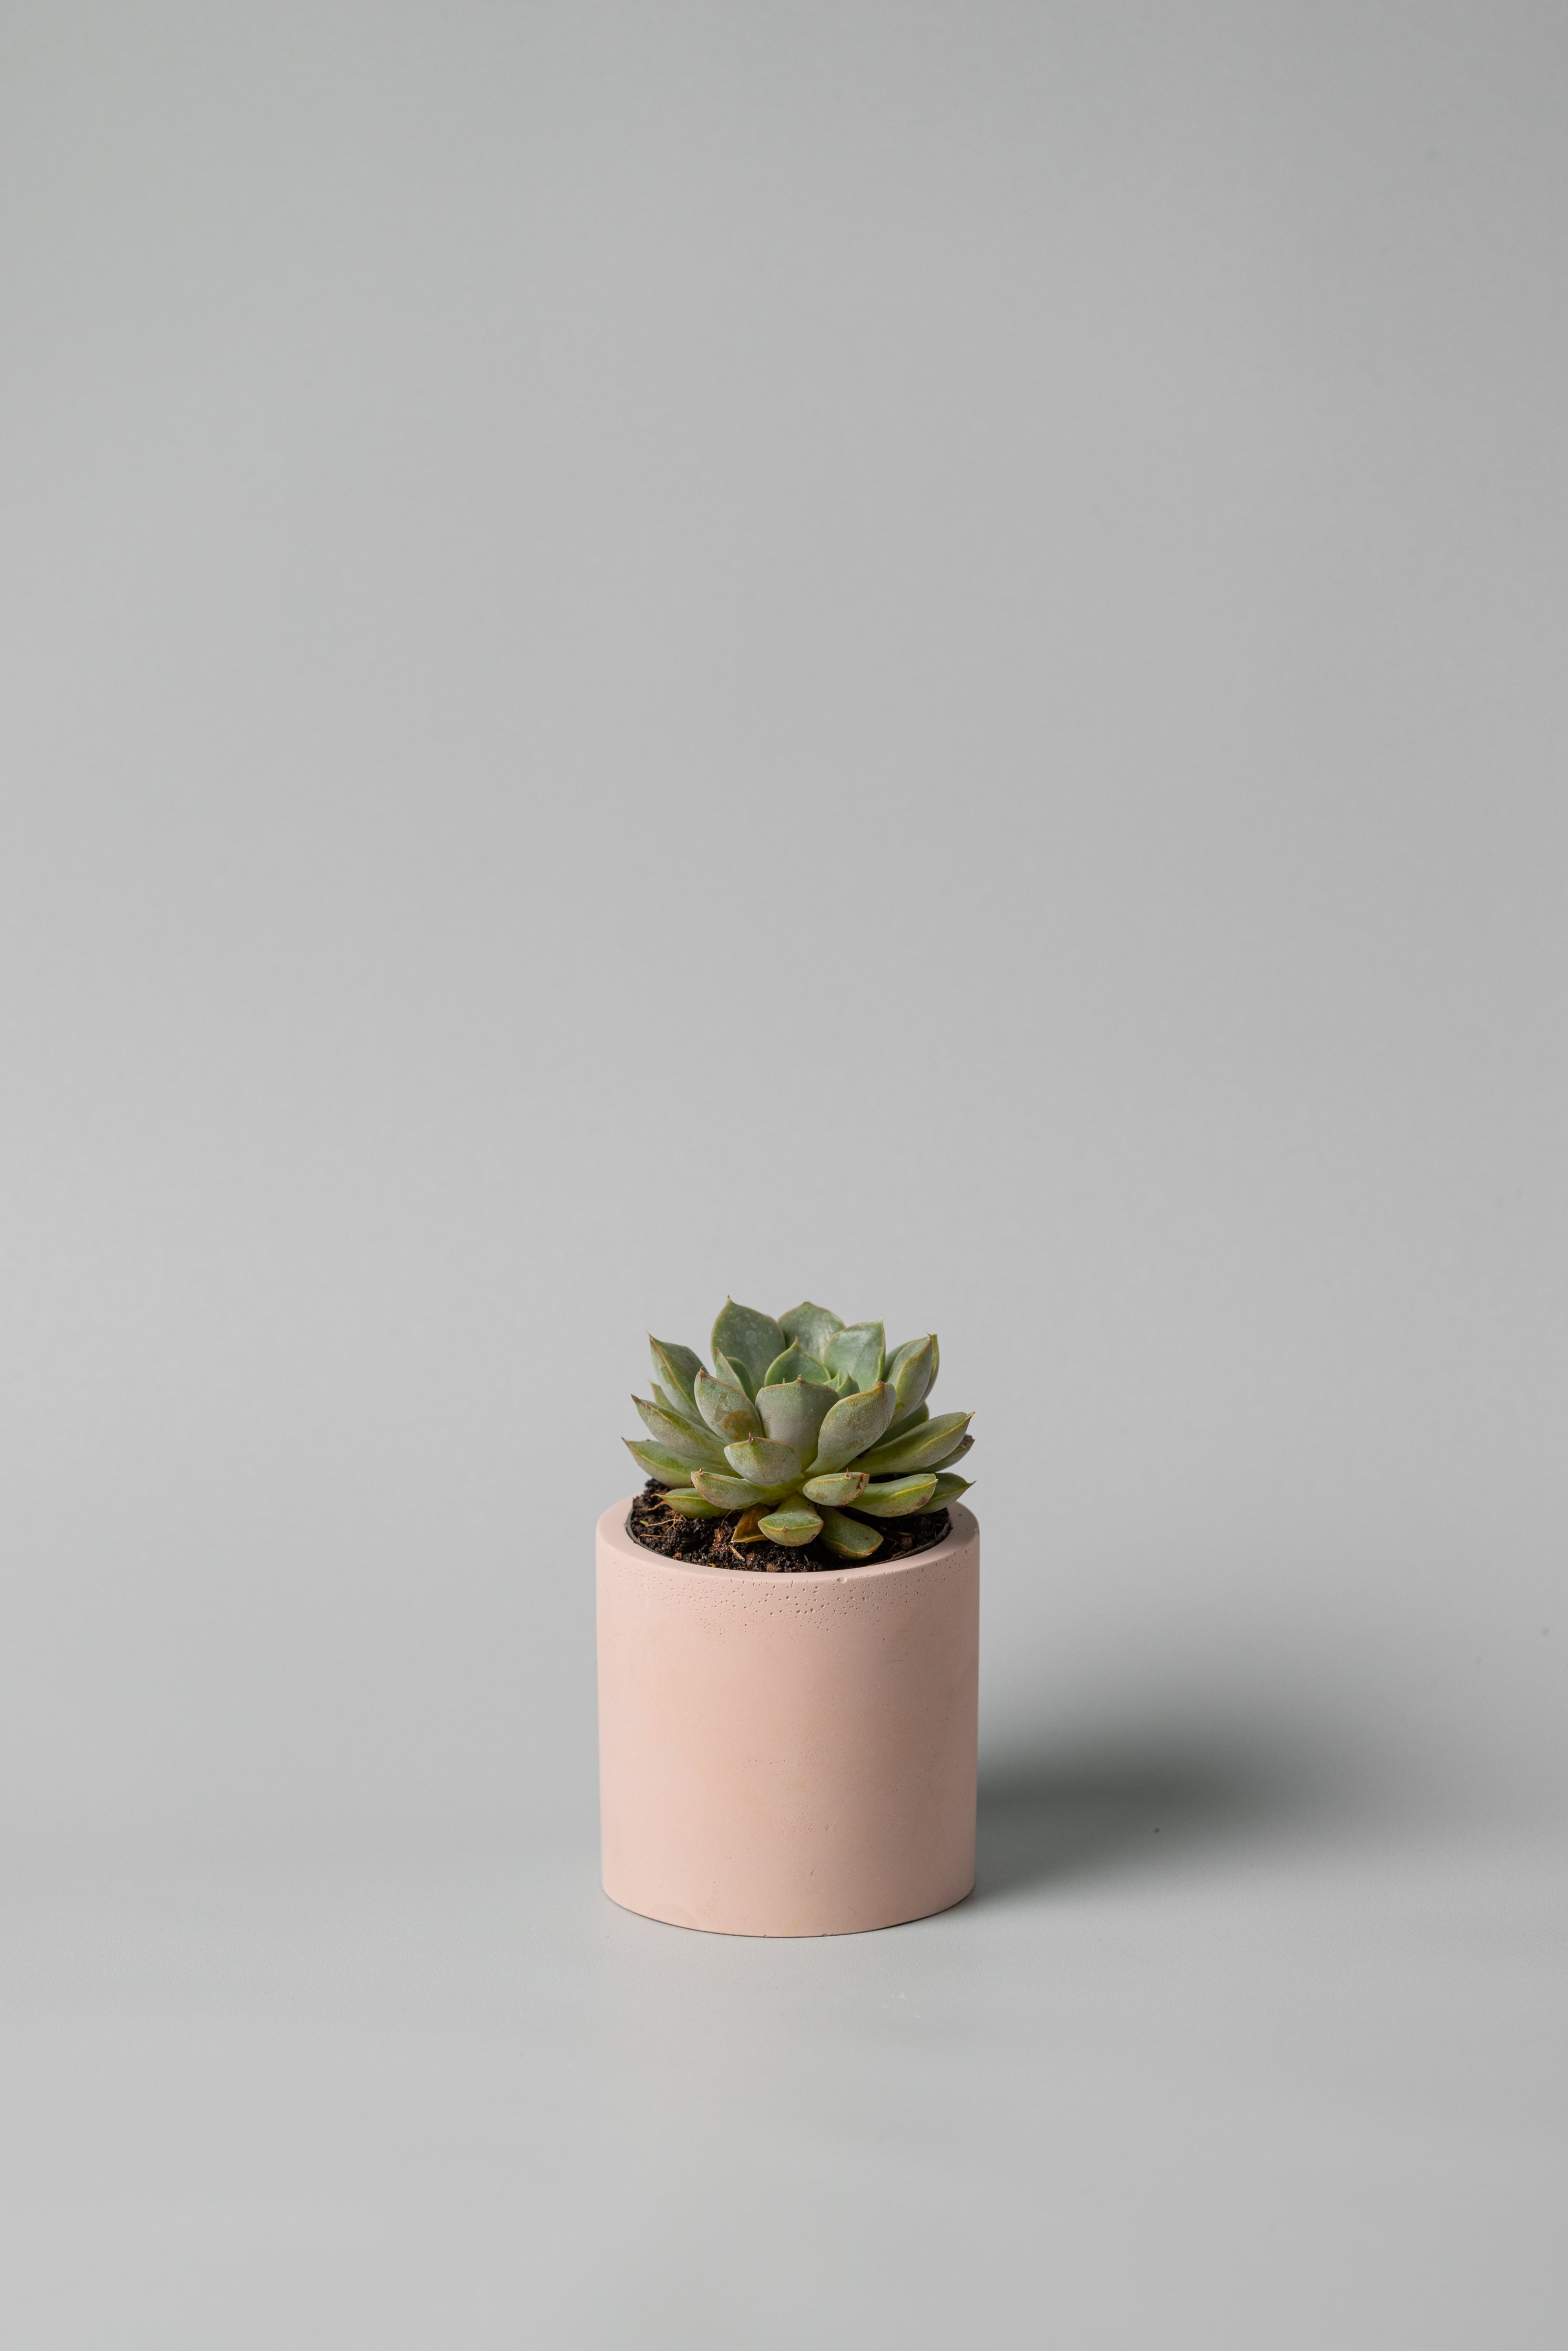 3" concrete cylinder planter in pink